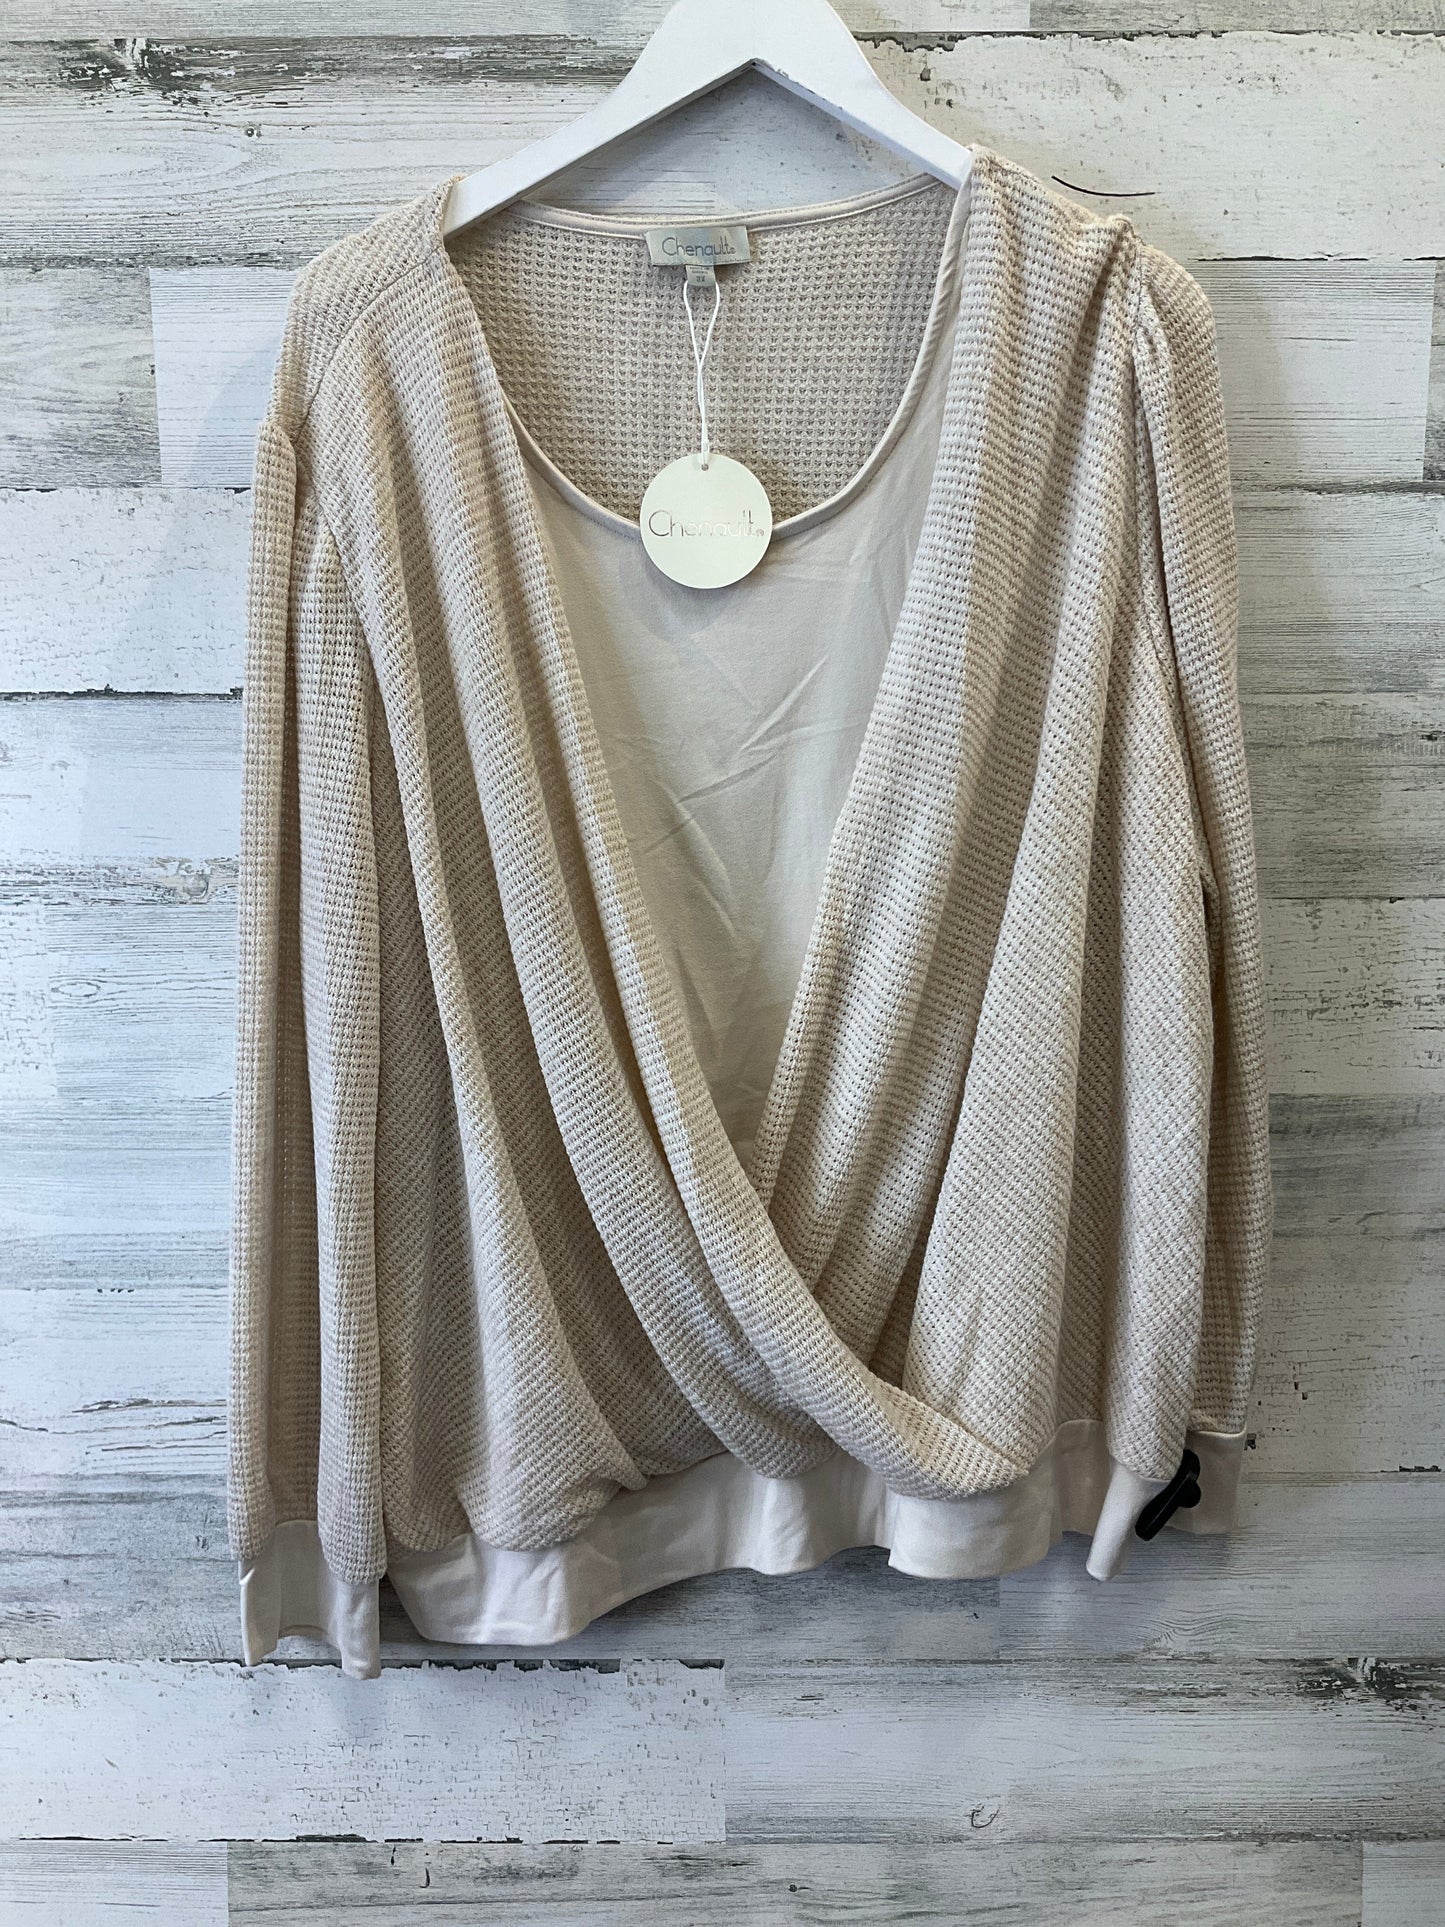 Tan Top Long Sleeve Chenault, Size 3x